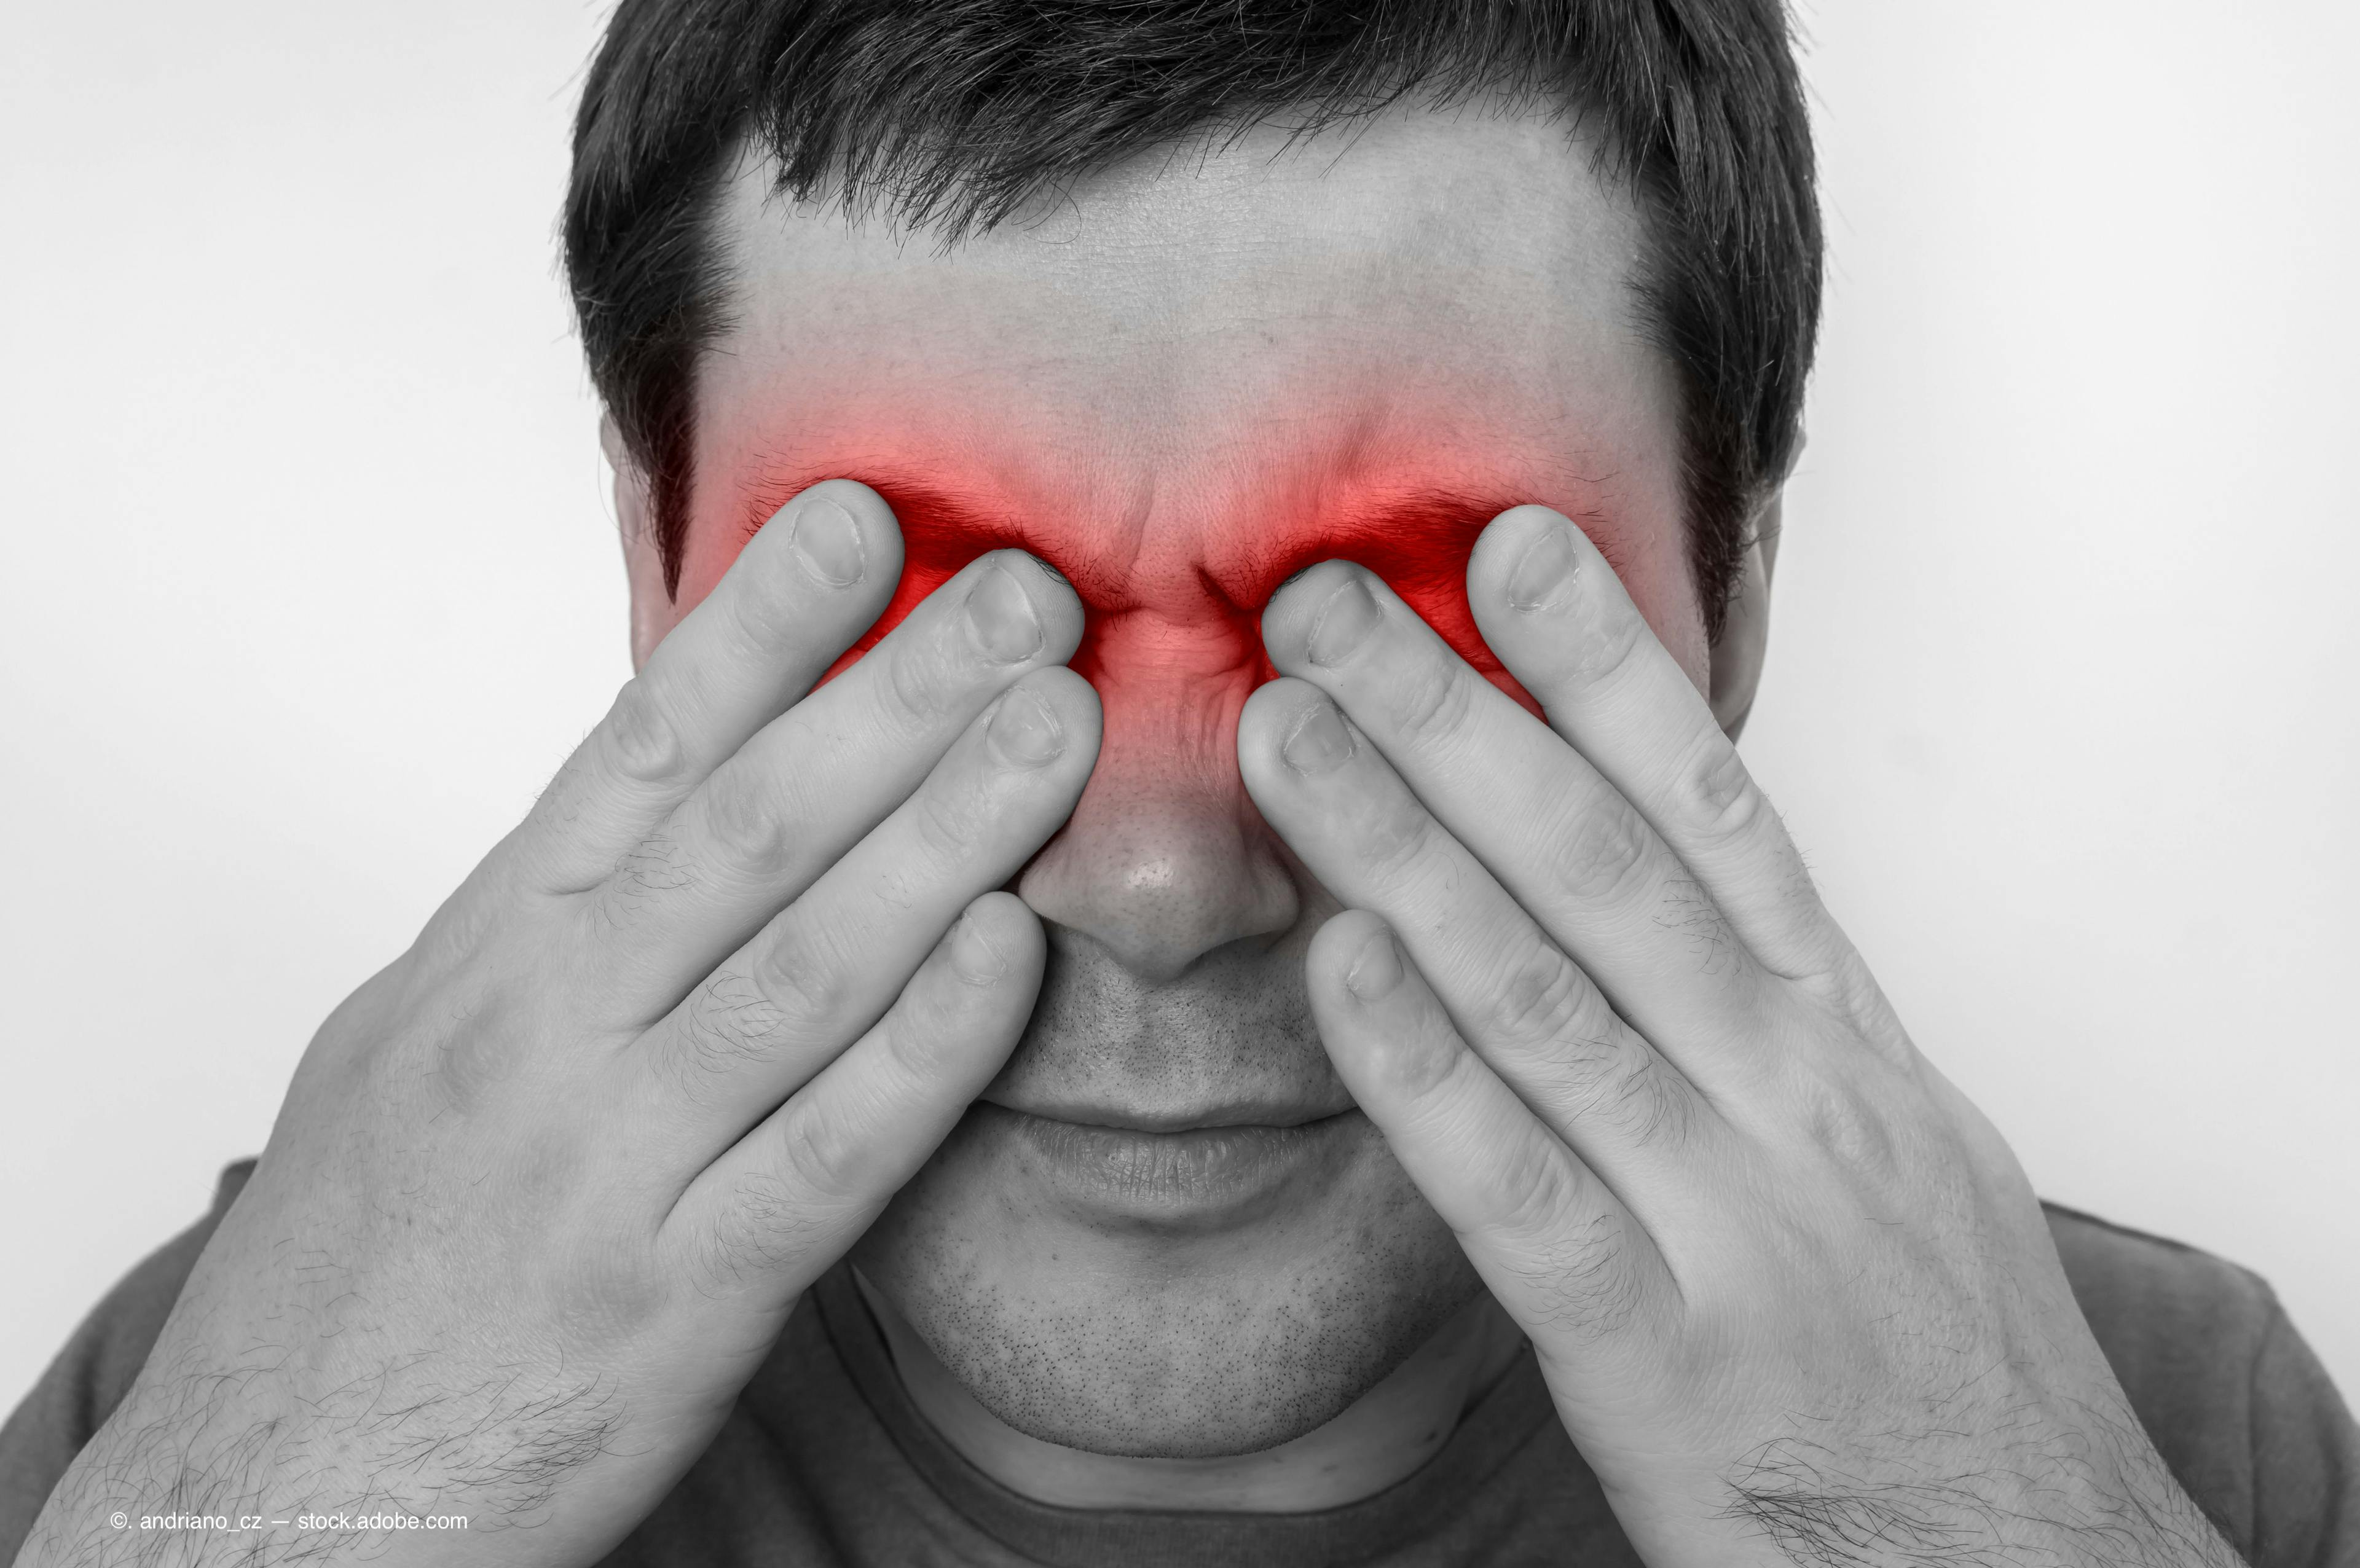 Study: Sore eyes a common symptom in COVID-19 patients